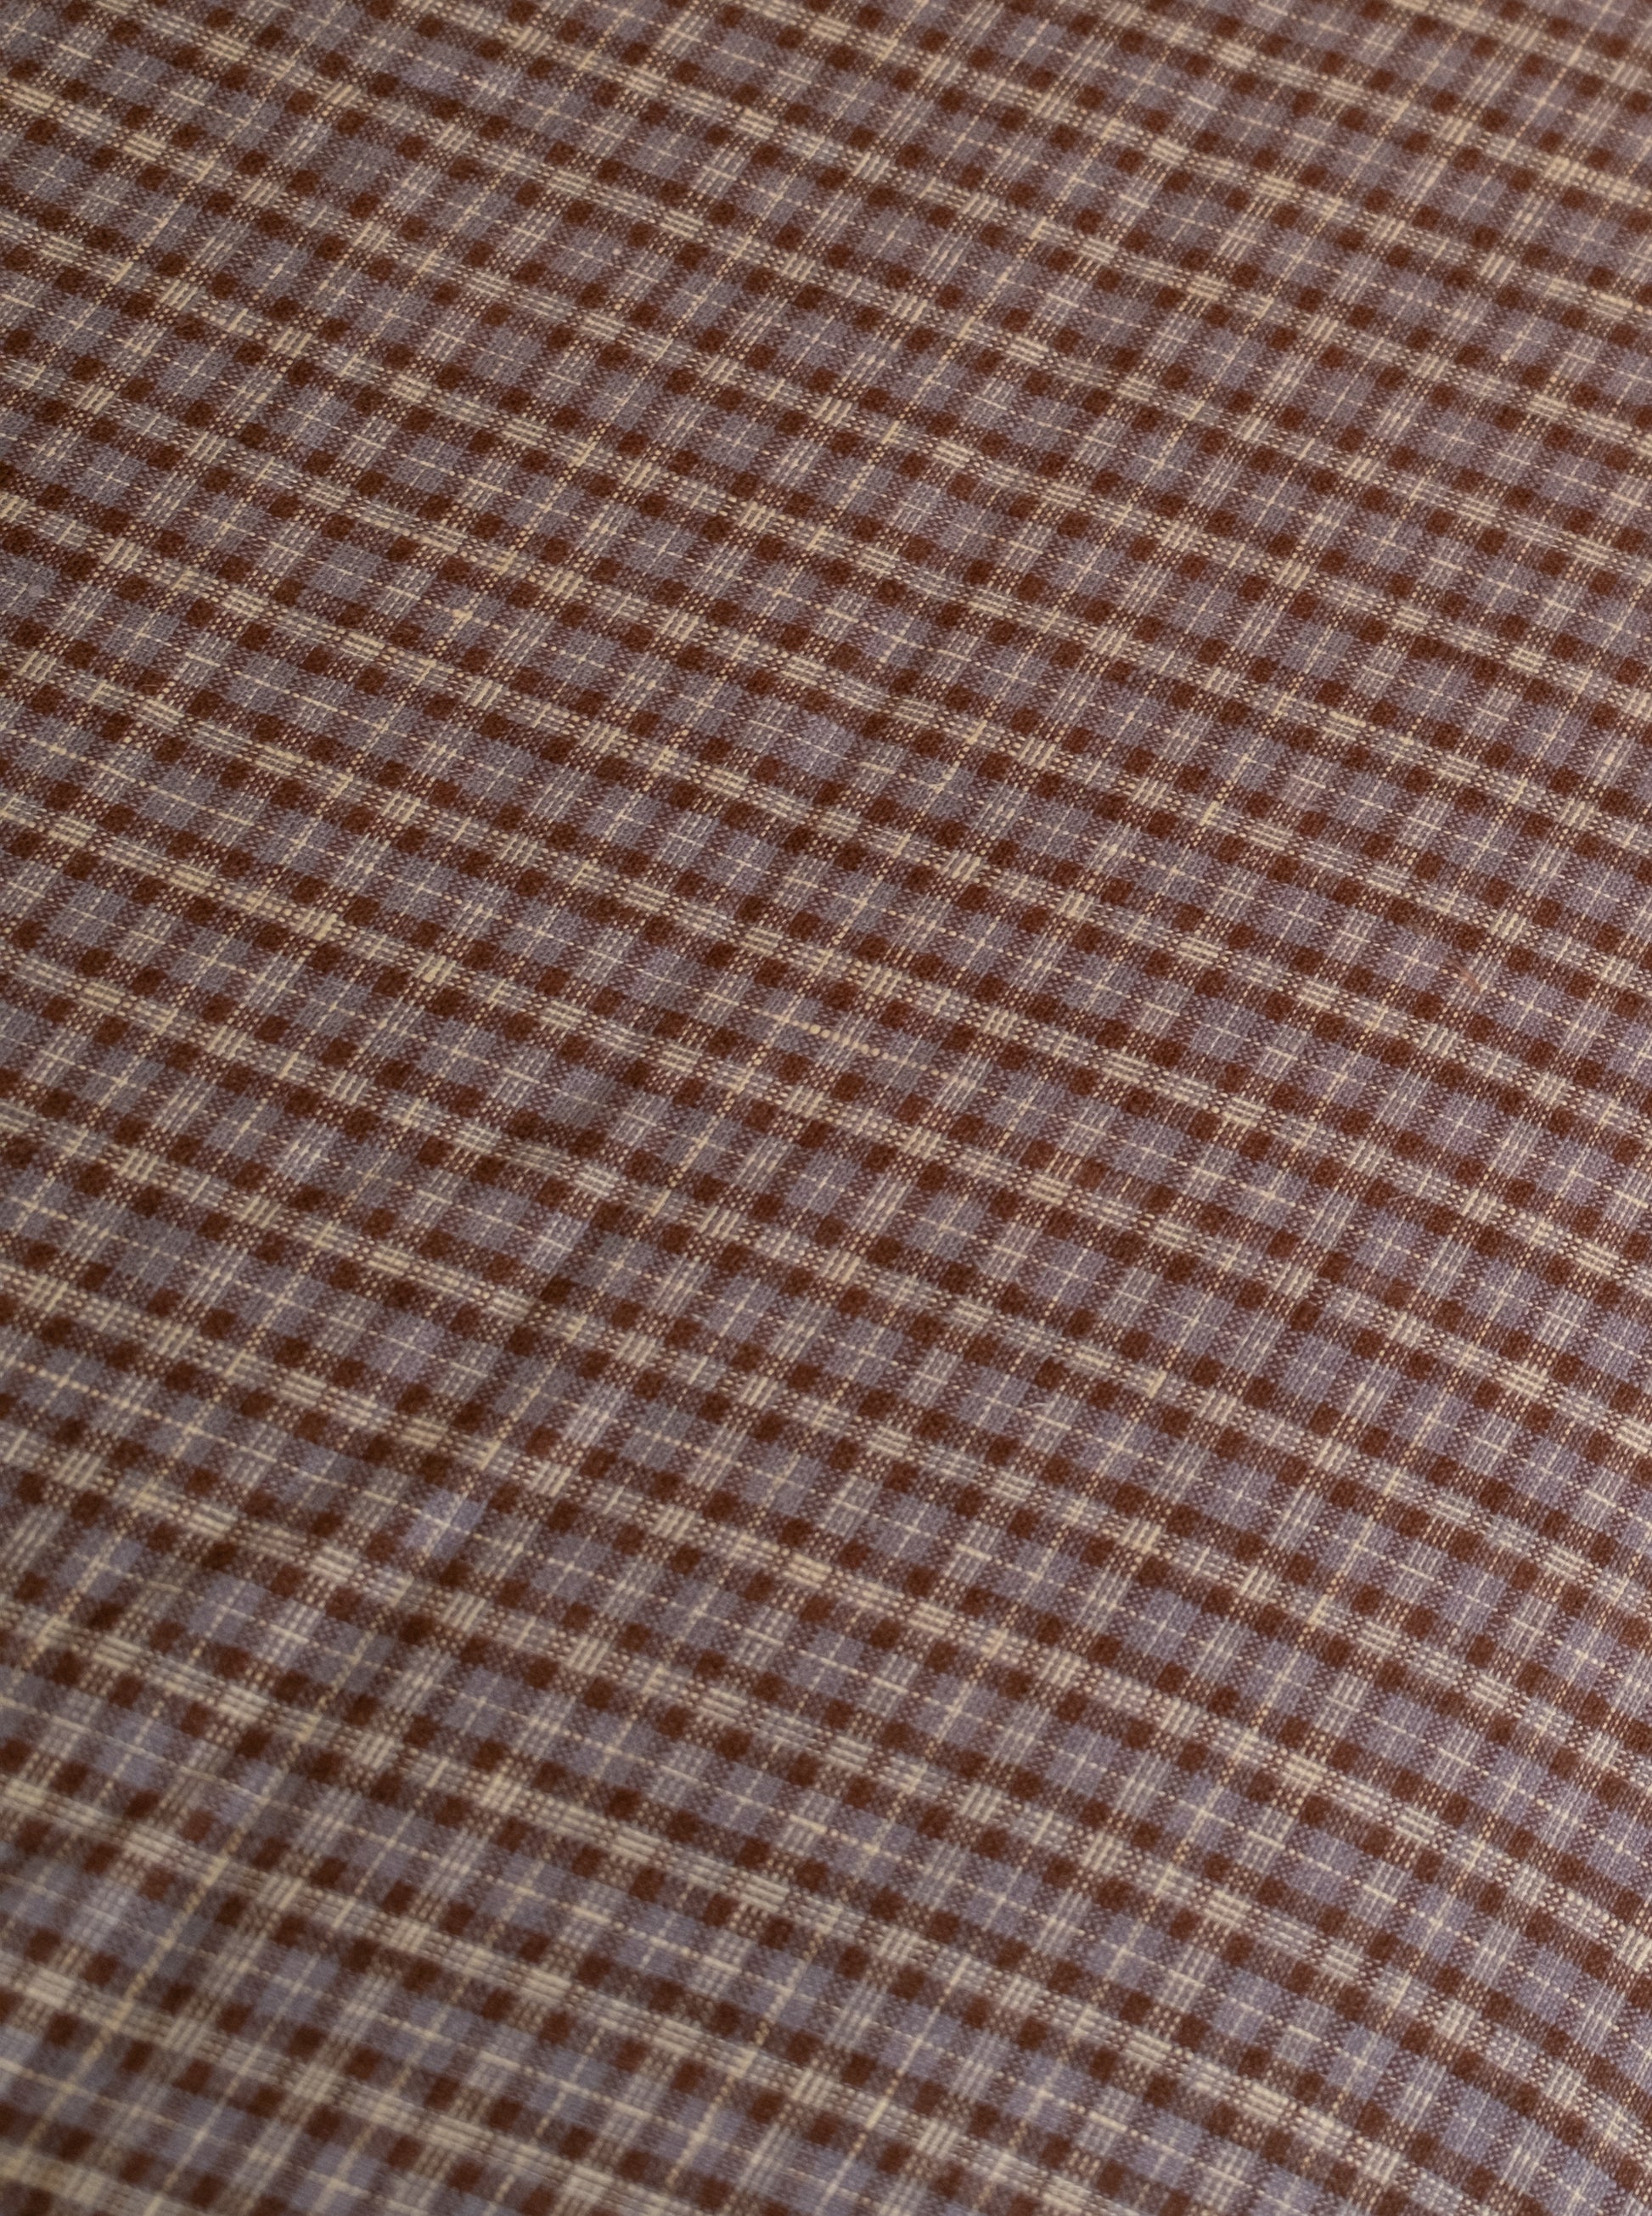 Close up of Duvet cover - russet check fabric by Deiji Studios